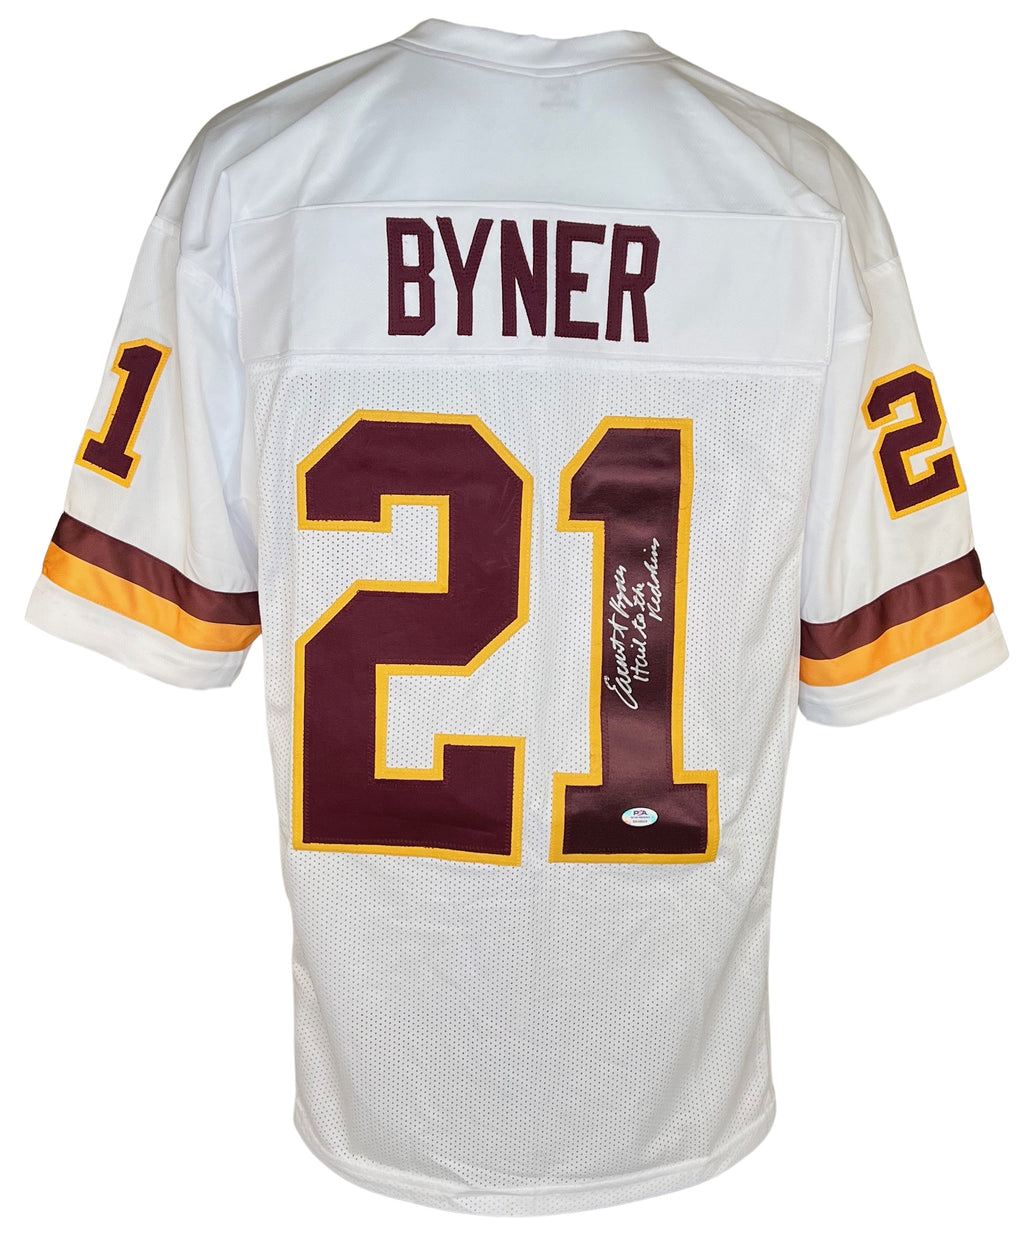 EARNEST BYNER AUTOGRAPHED SIGNED INSCRIBED WHITE JERSEY PRO STYLE PSA ITP COA